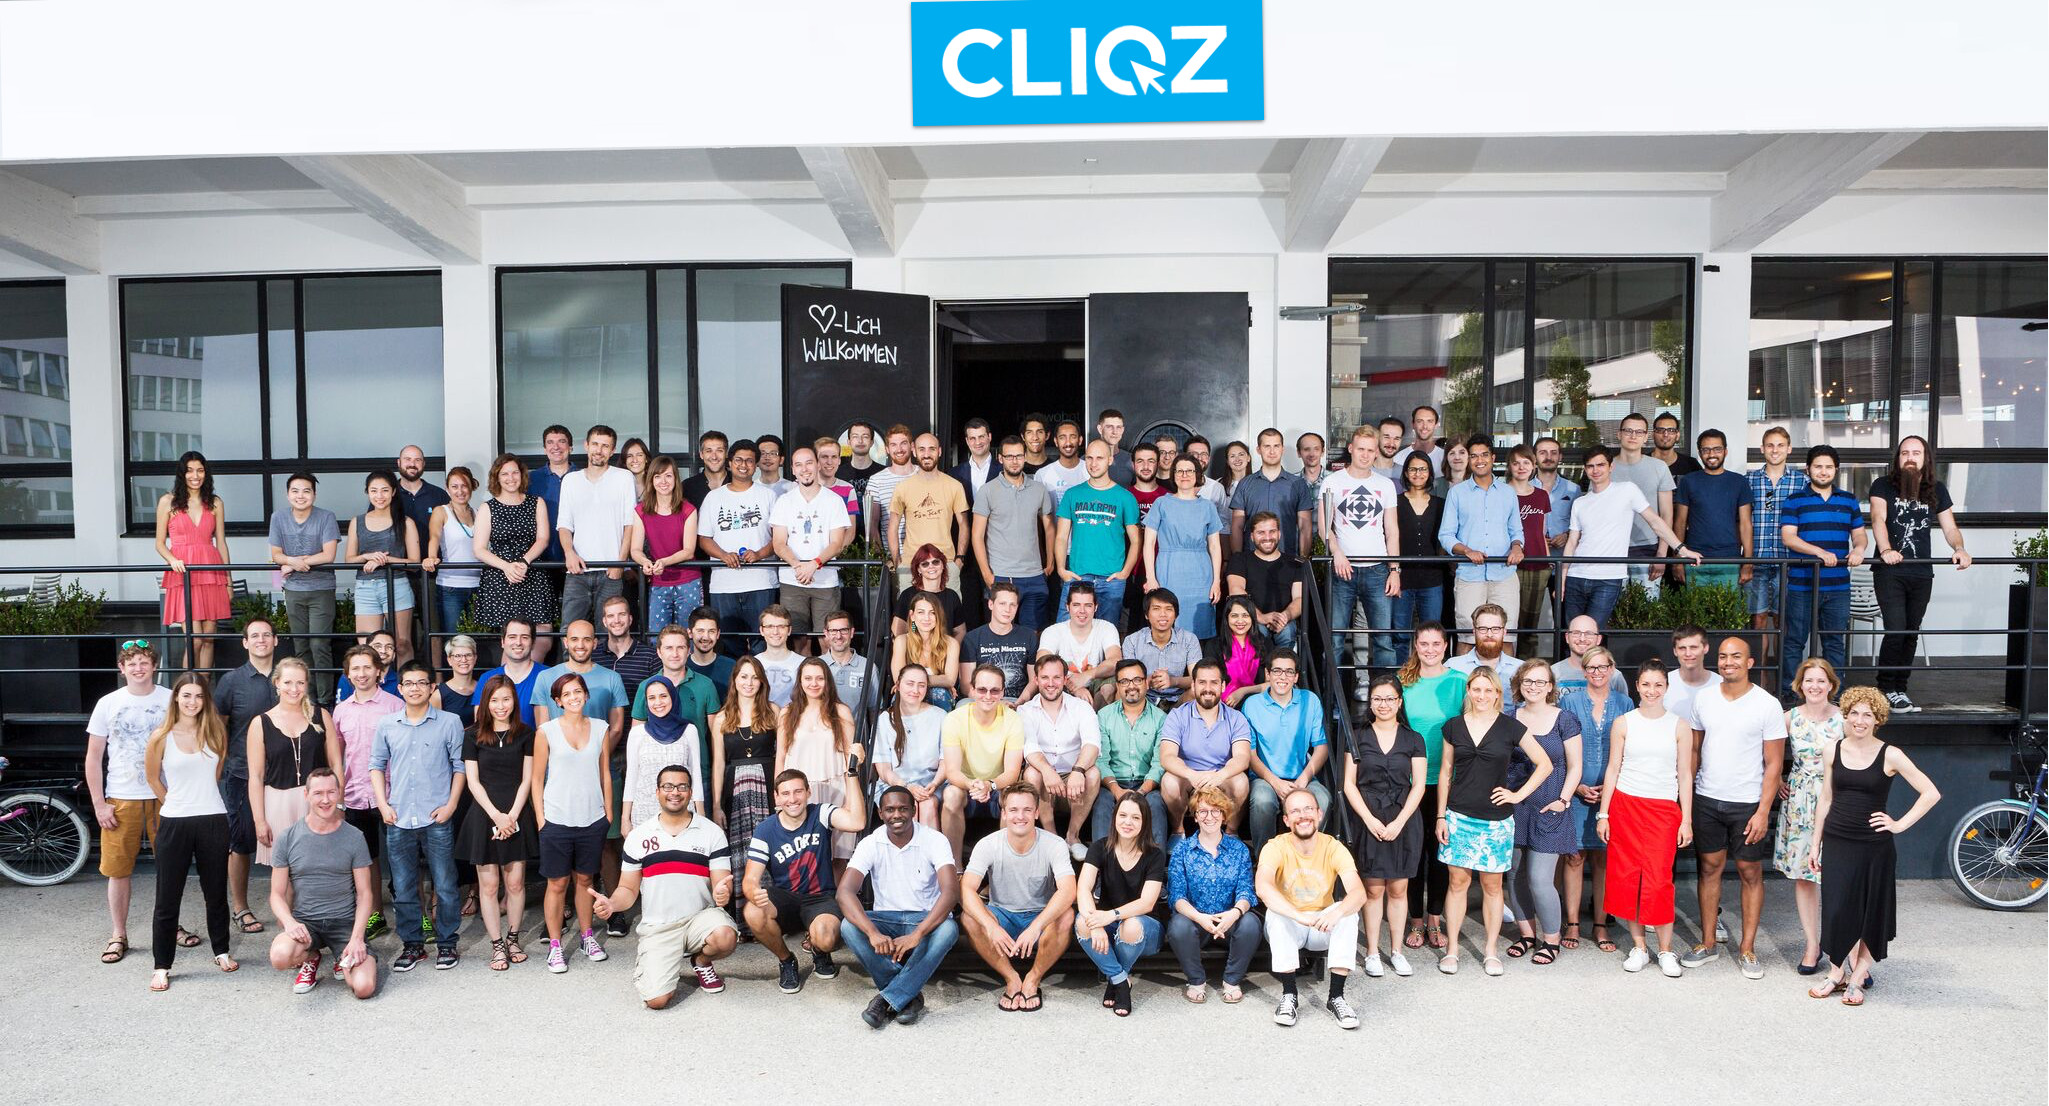 The People Behind the Tech @ Cliqz